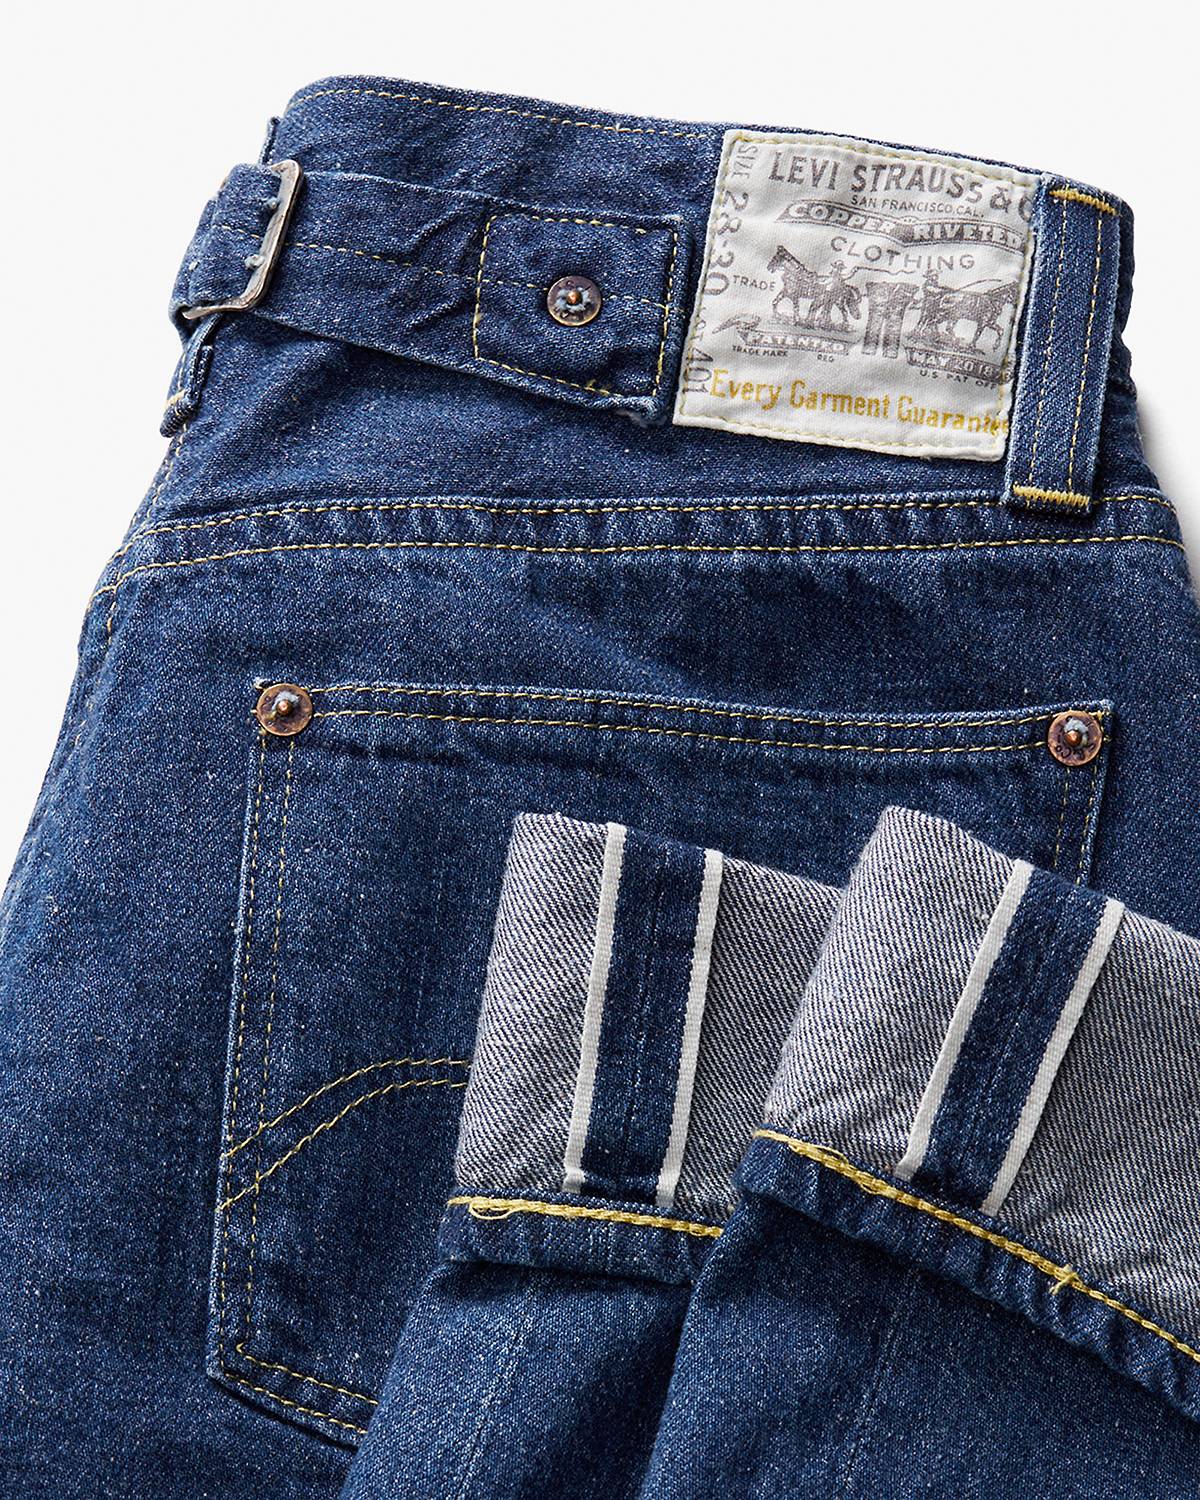 Laydown image of the back patch and cuff of the Levi's® 1930s VIOLA LONGACRE 401® JEANS.